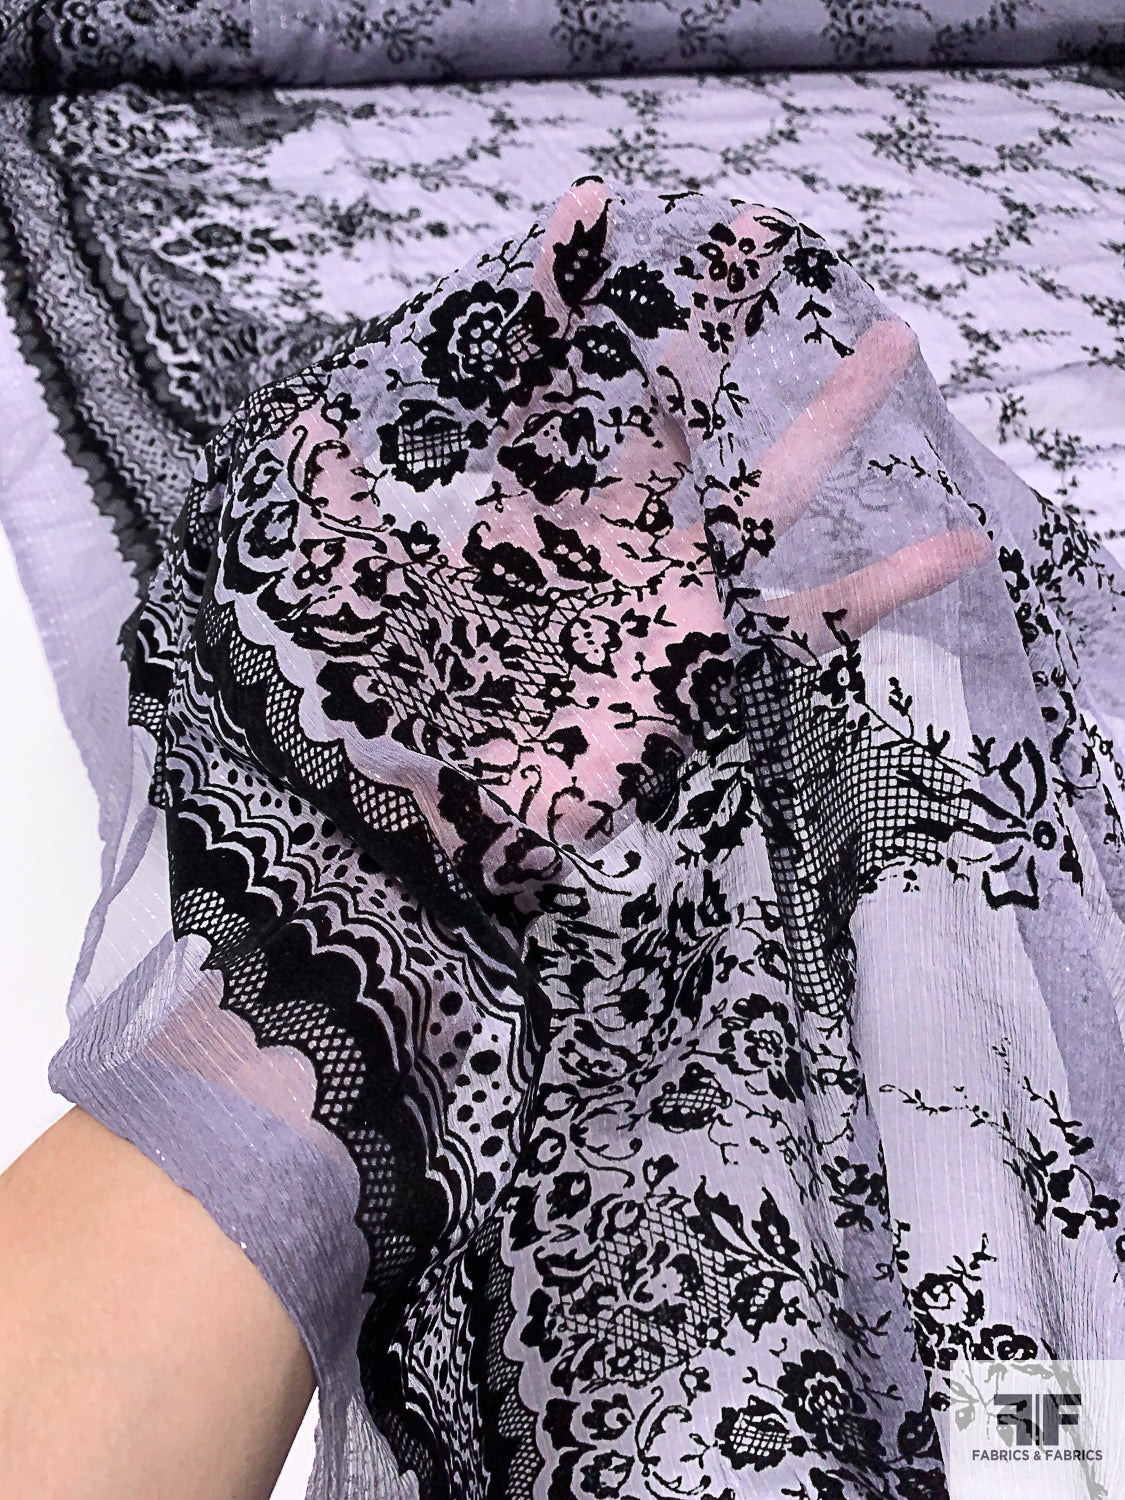 Flocked Intricate Floral Silk Chiffon with Lurex Pinstripes - Dusty Lilac / Black / Silver